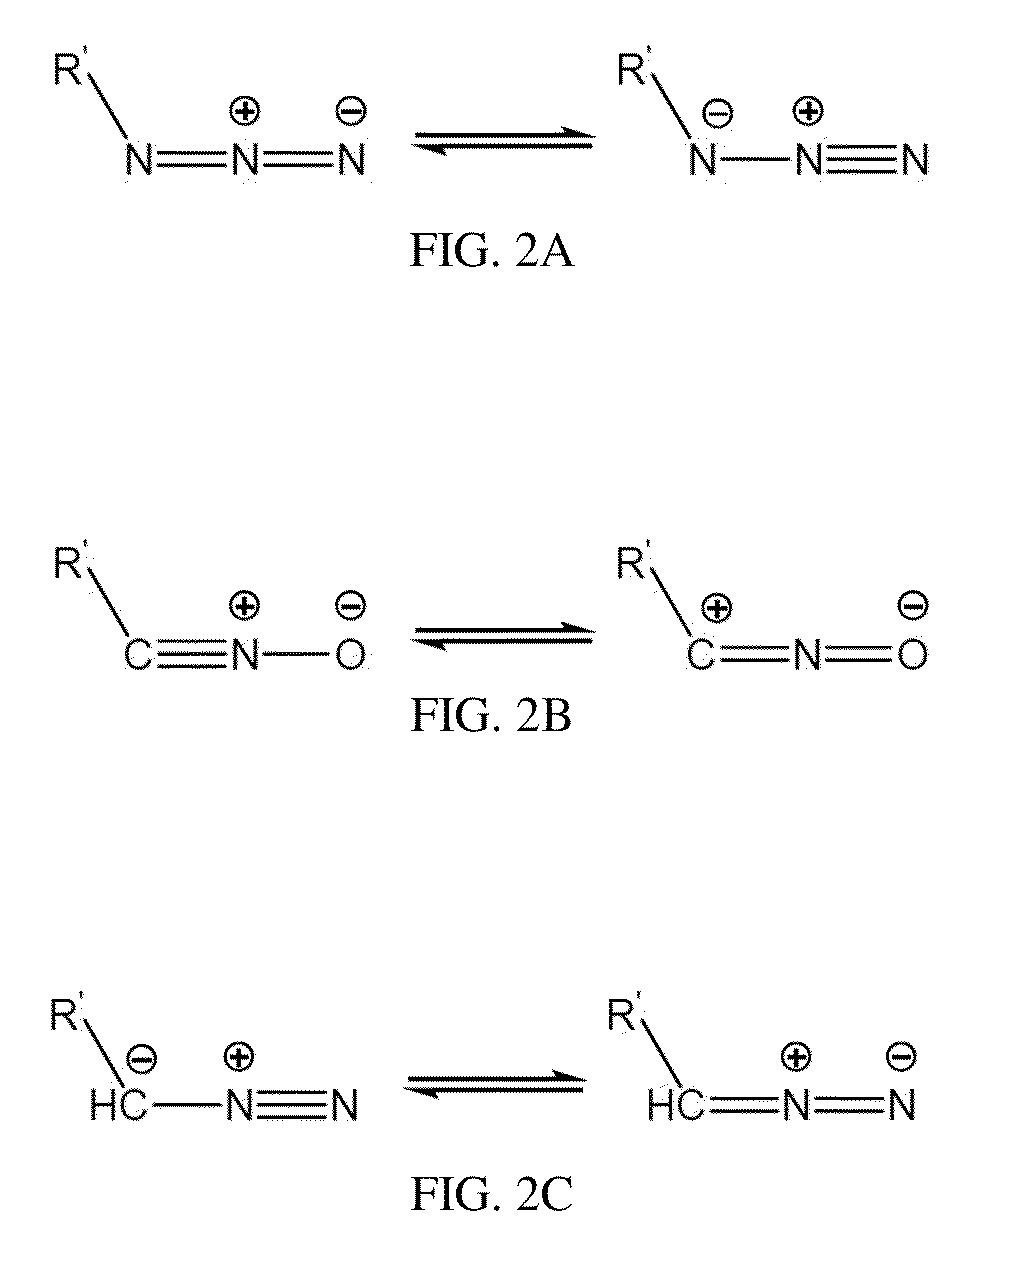 High charge density structures, including carbon-based nanostructures and applications thereof